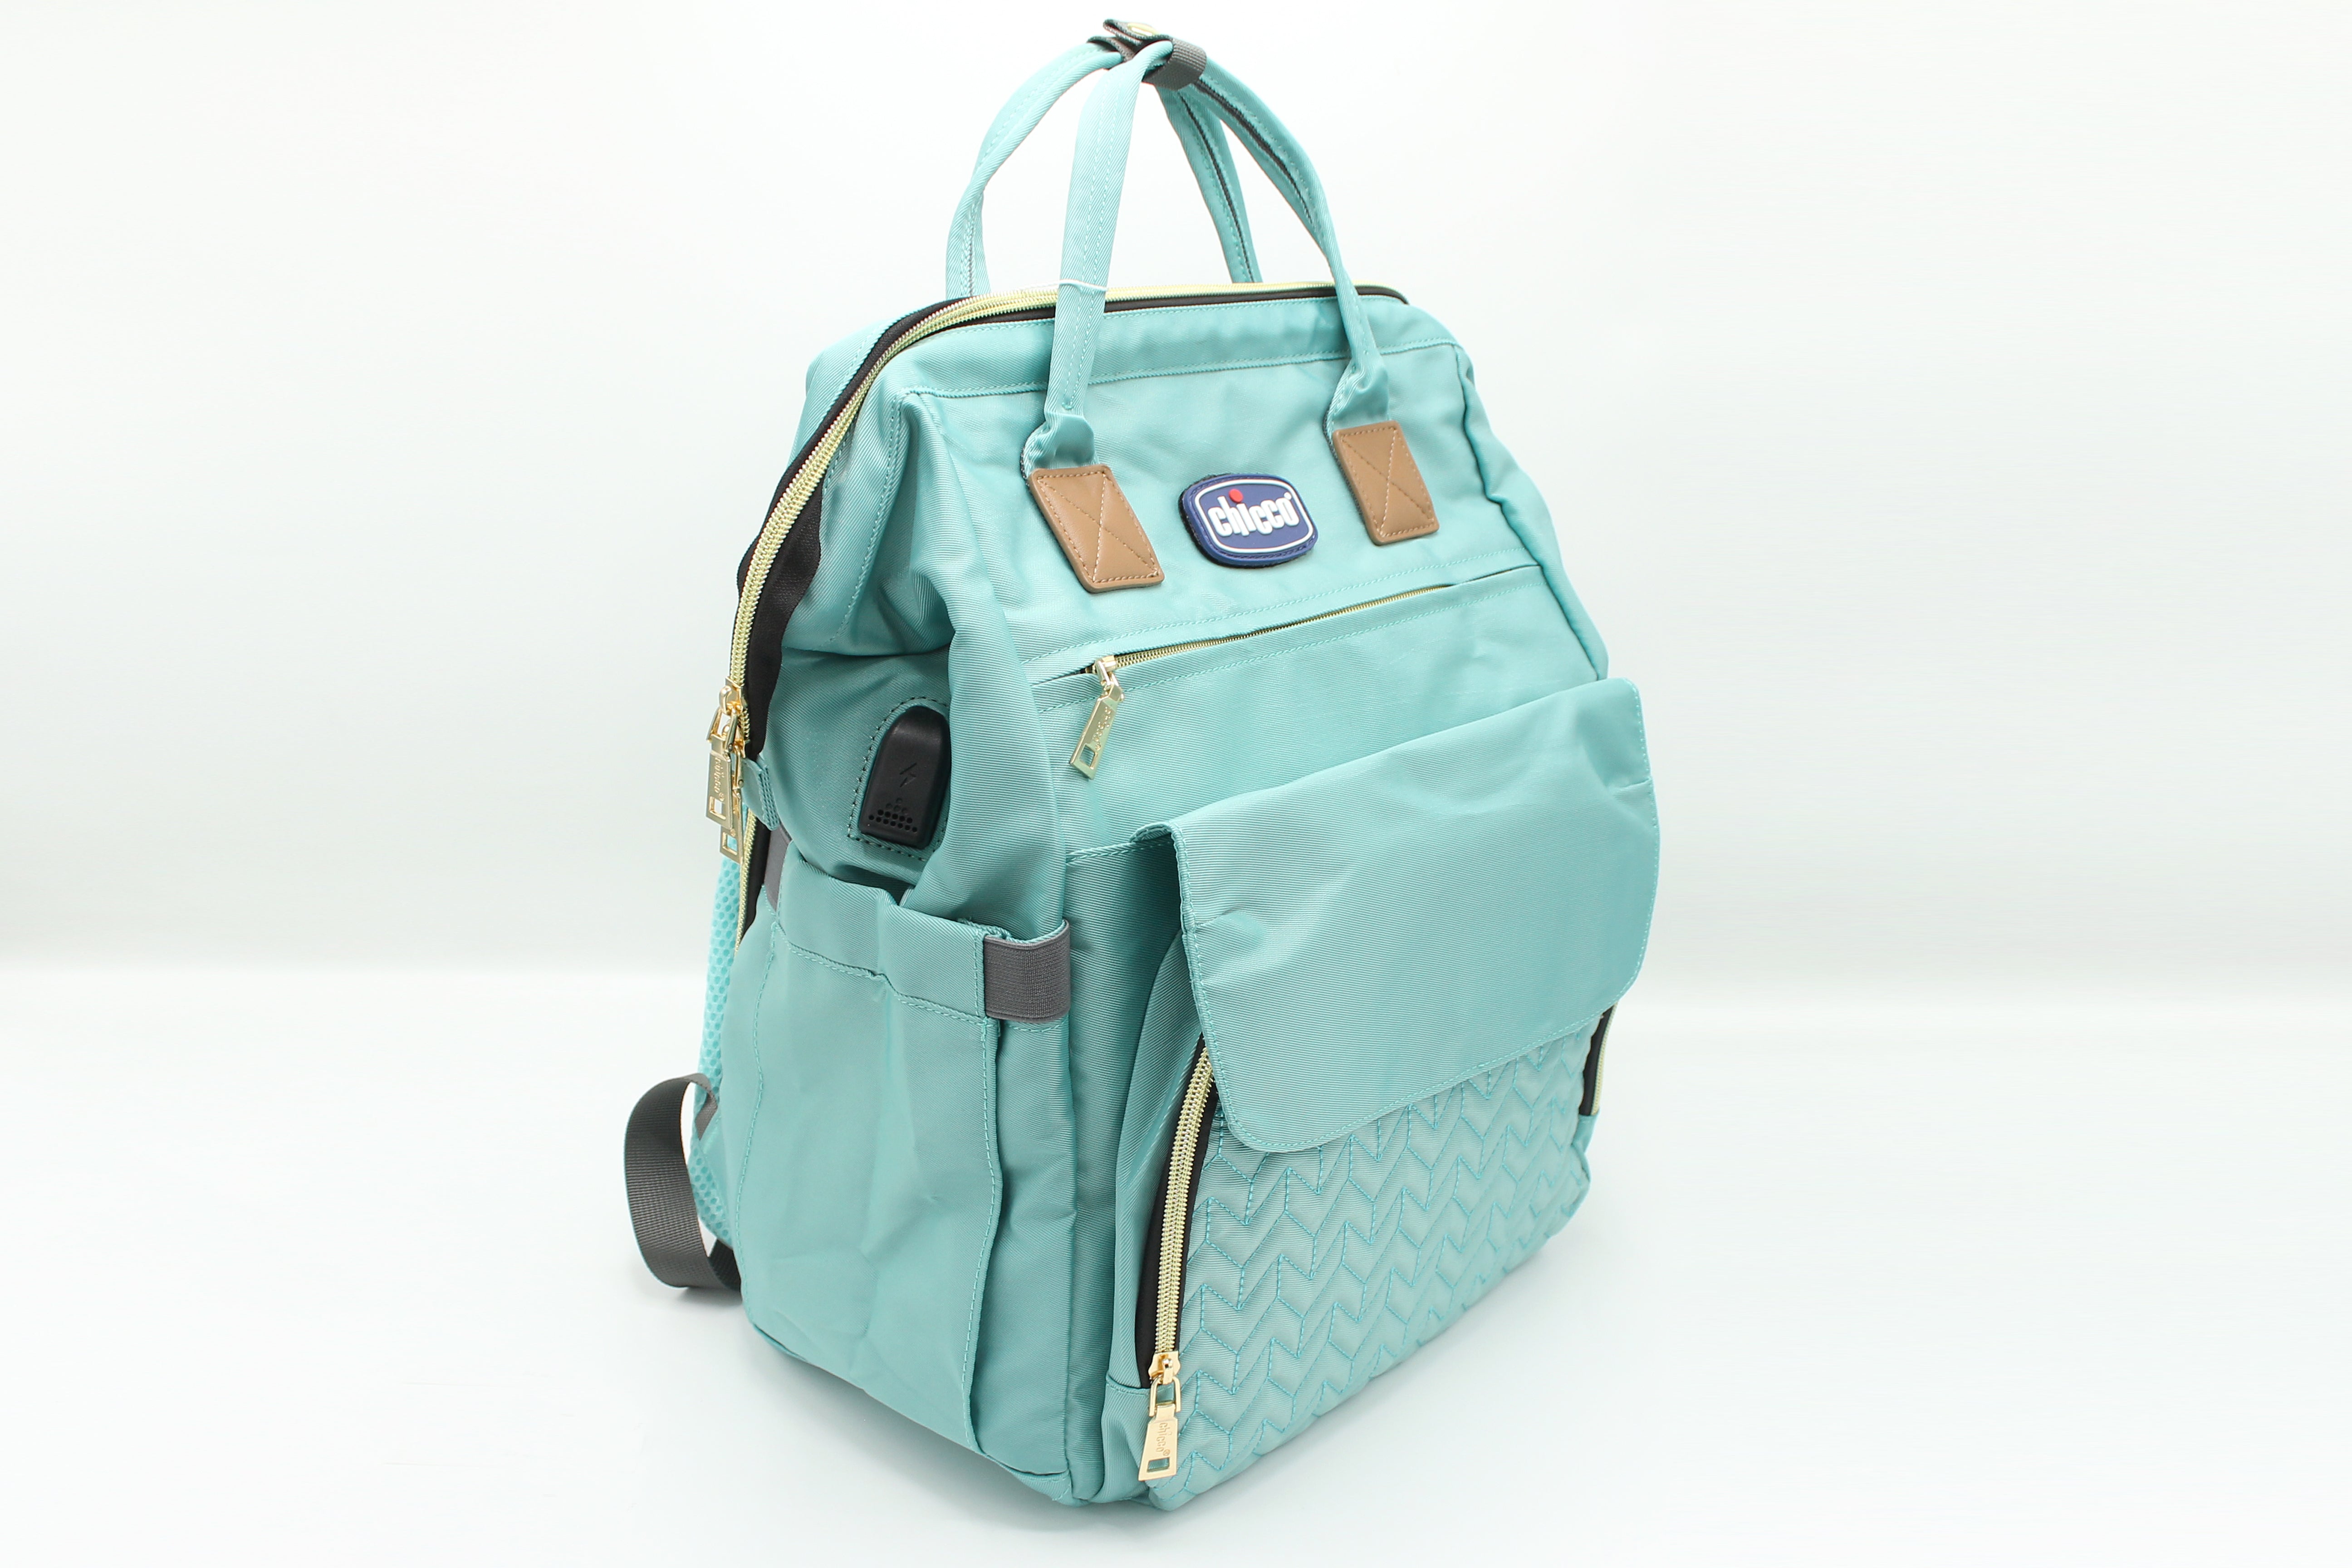 CHICCO MOTHER BAG - 30192